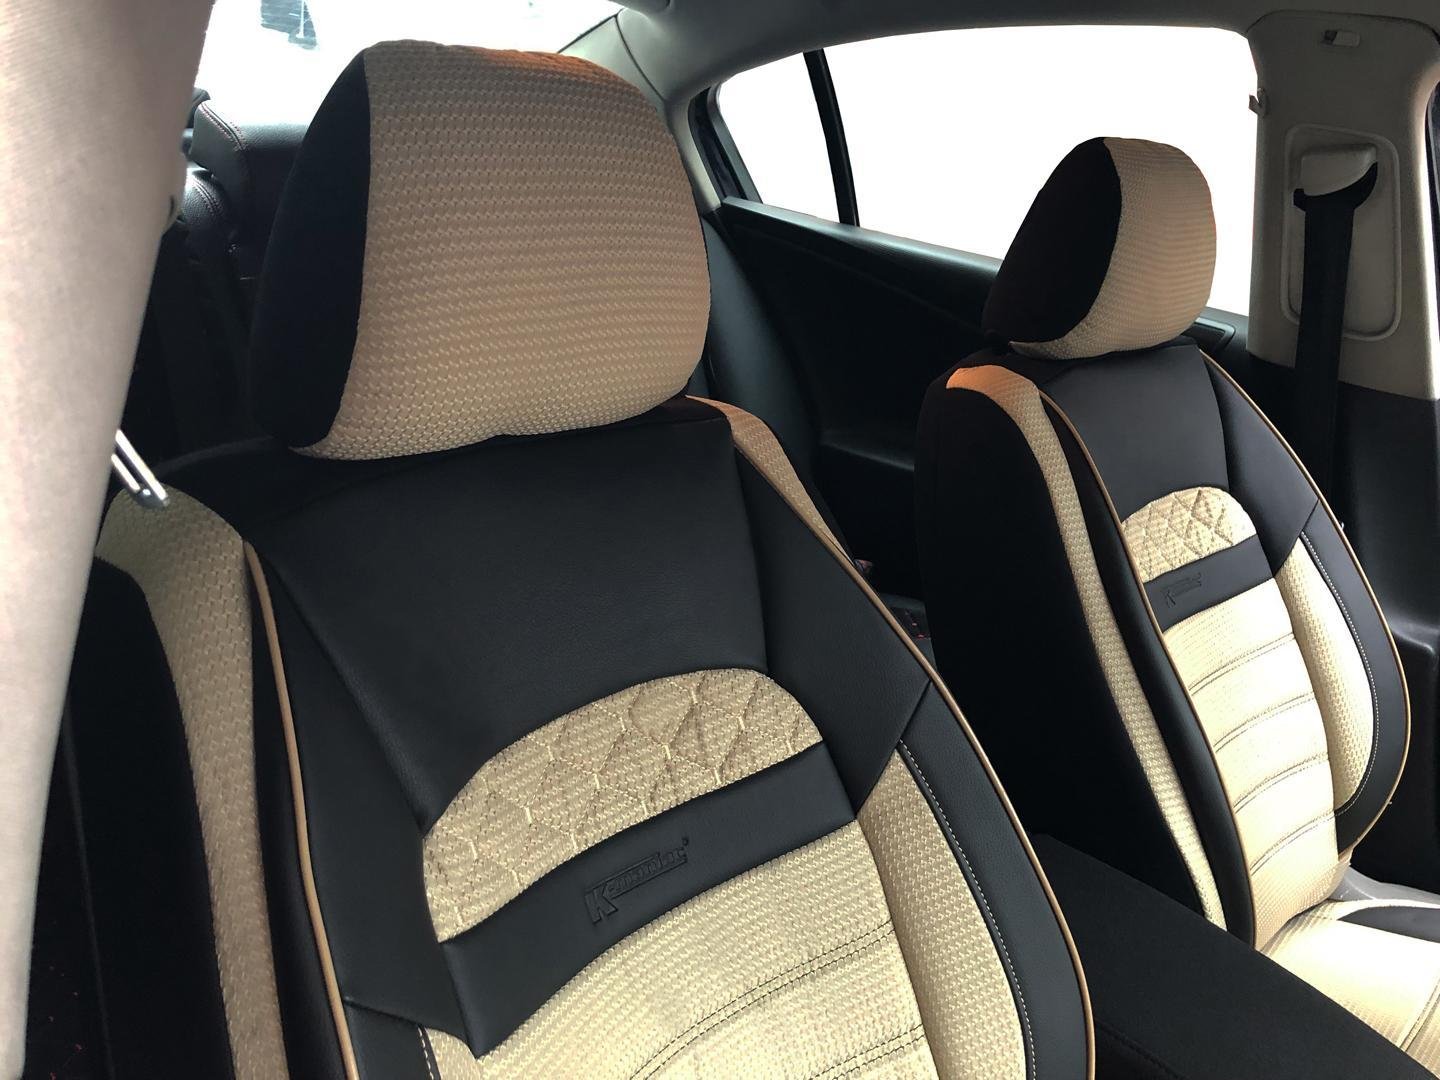 Car Seat Covers Protectors For Vw Jetta Iv Black Beige V25 Front Seats - Car Seat Covers For 2019 Vw Jetta